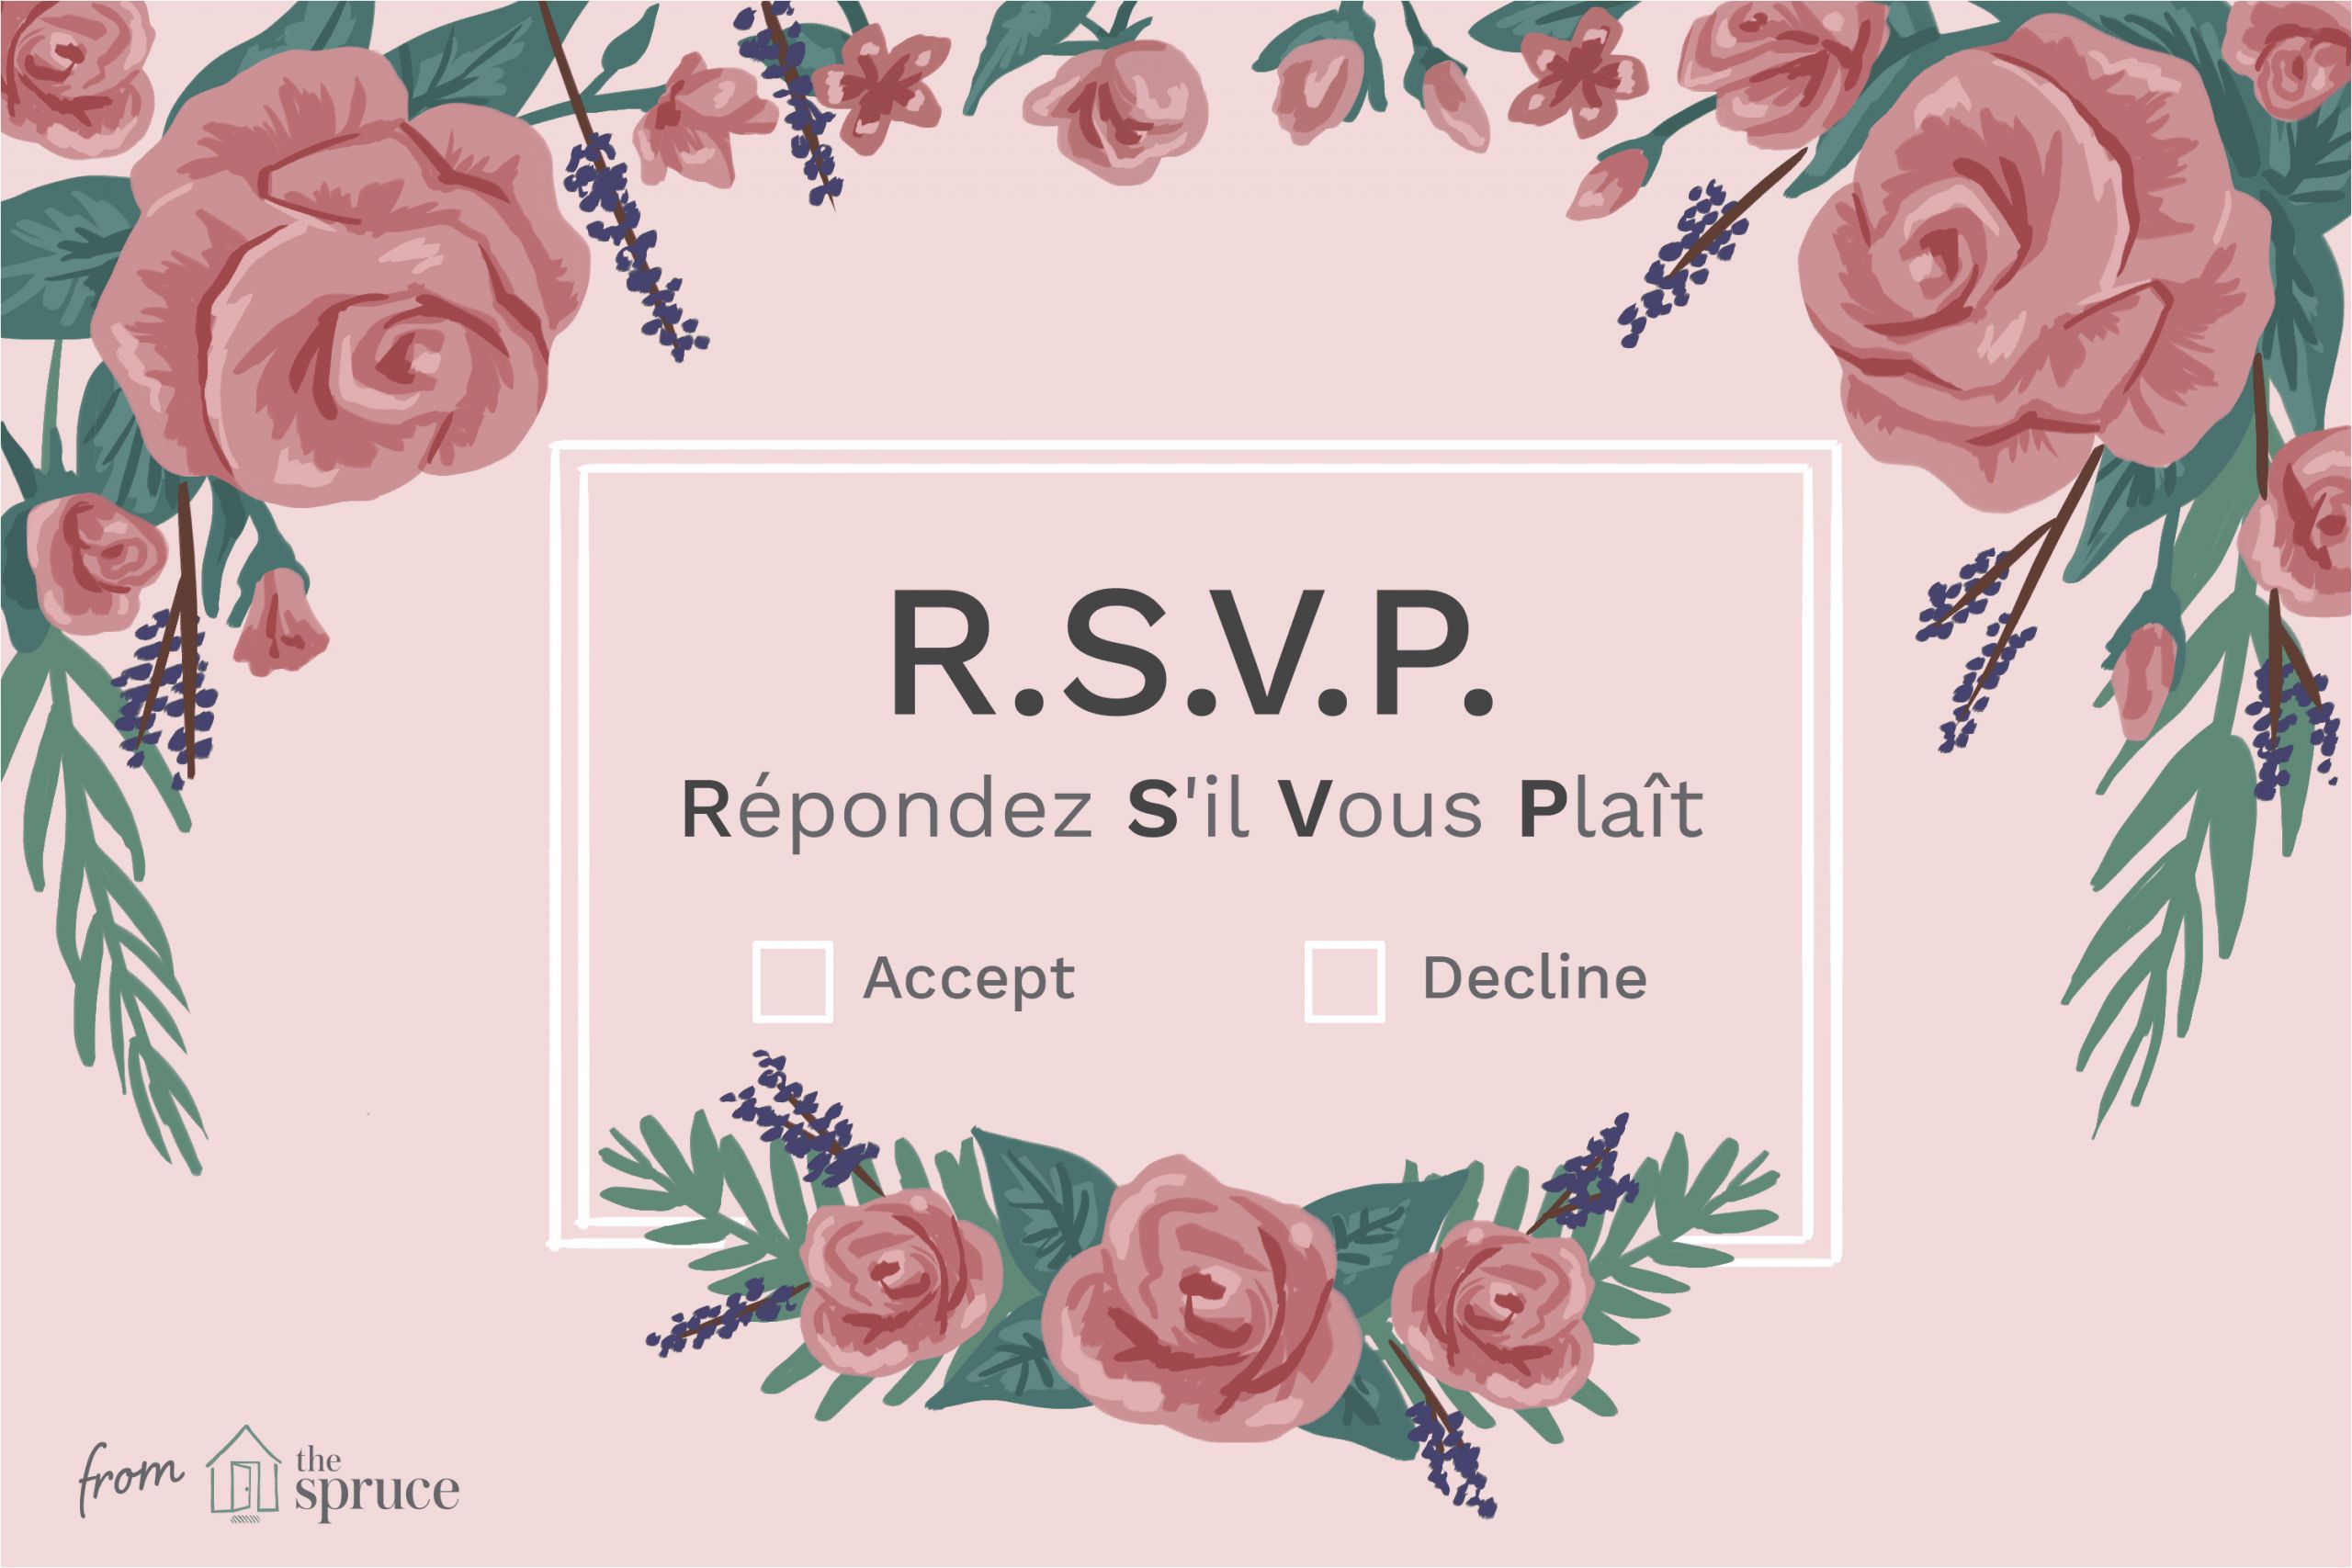 Rsvp Full form In Marriage Card What Does Rsvp Mean On An Invitation